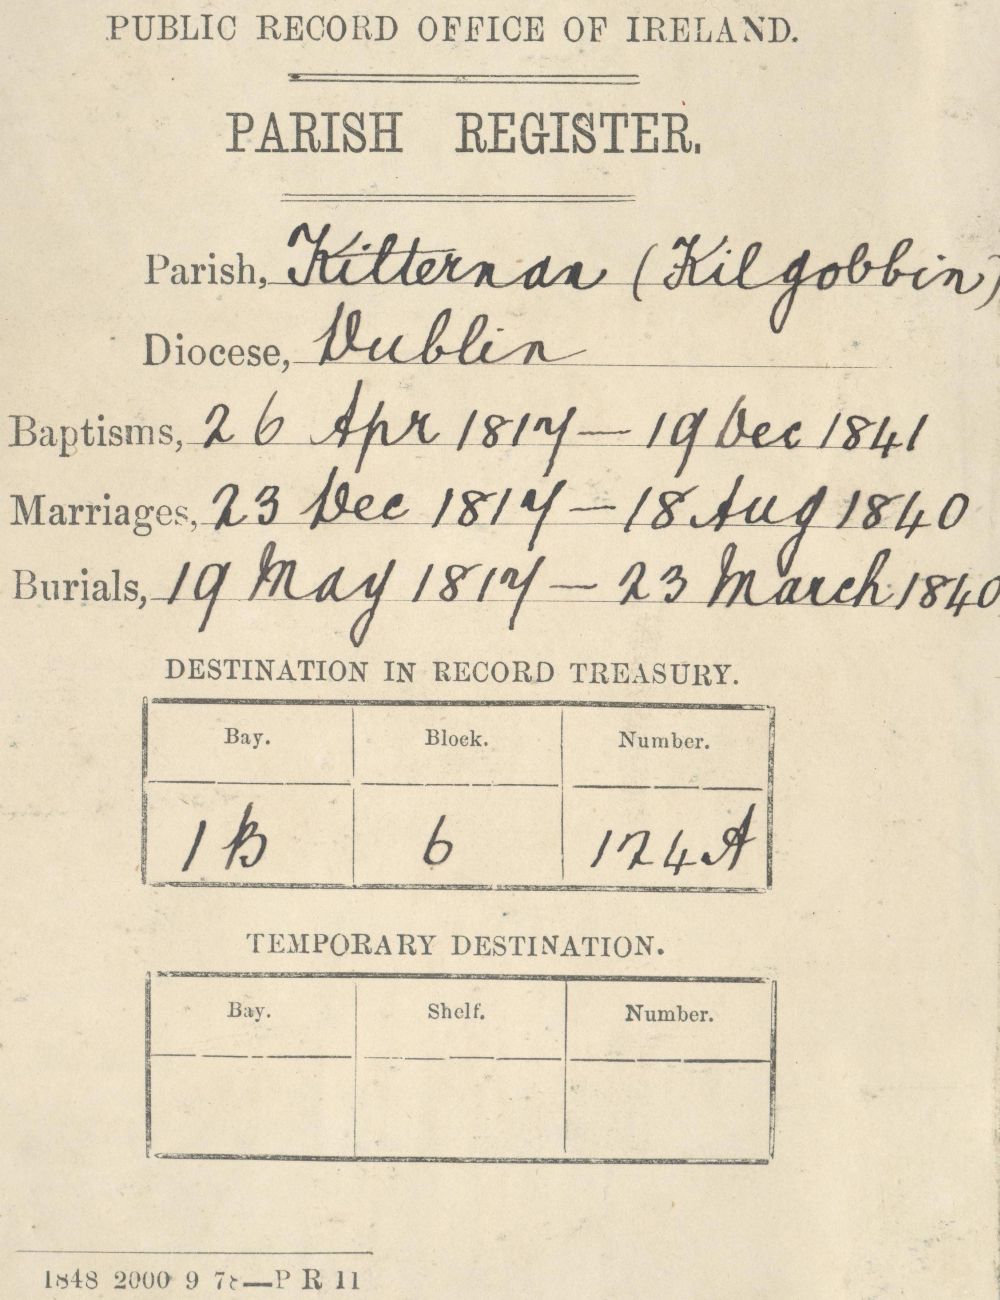 Public Record Office labels as affixed to each of the combined registers for Kilternan on receipt following their transfer in the context of the Public Records Office Ireland Act of 1867.